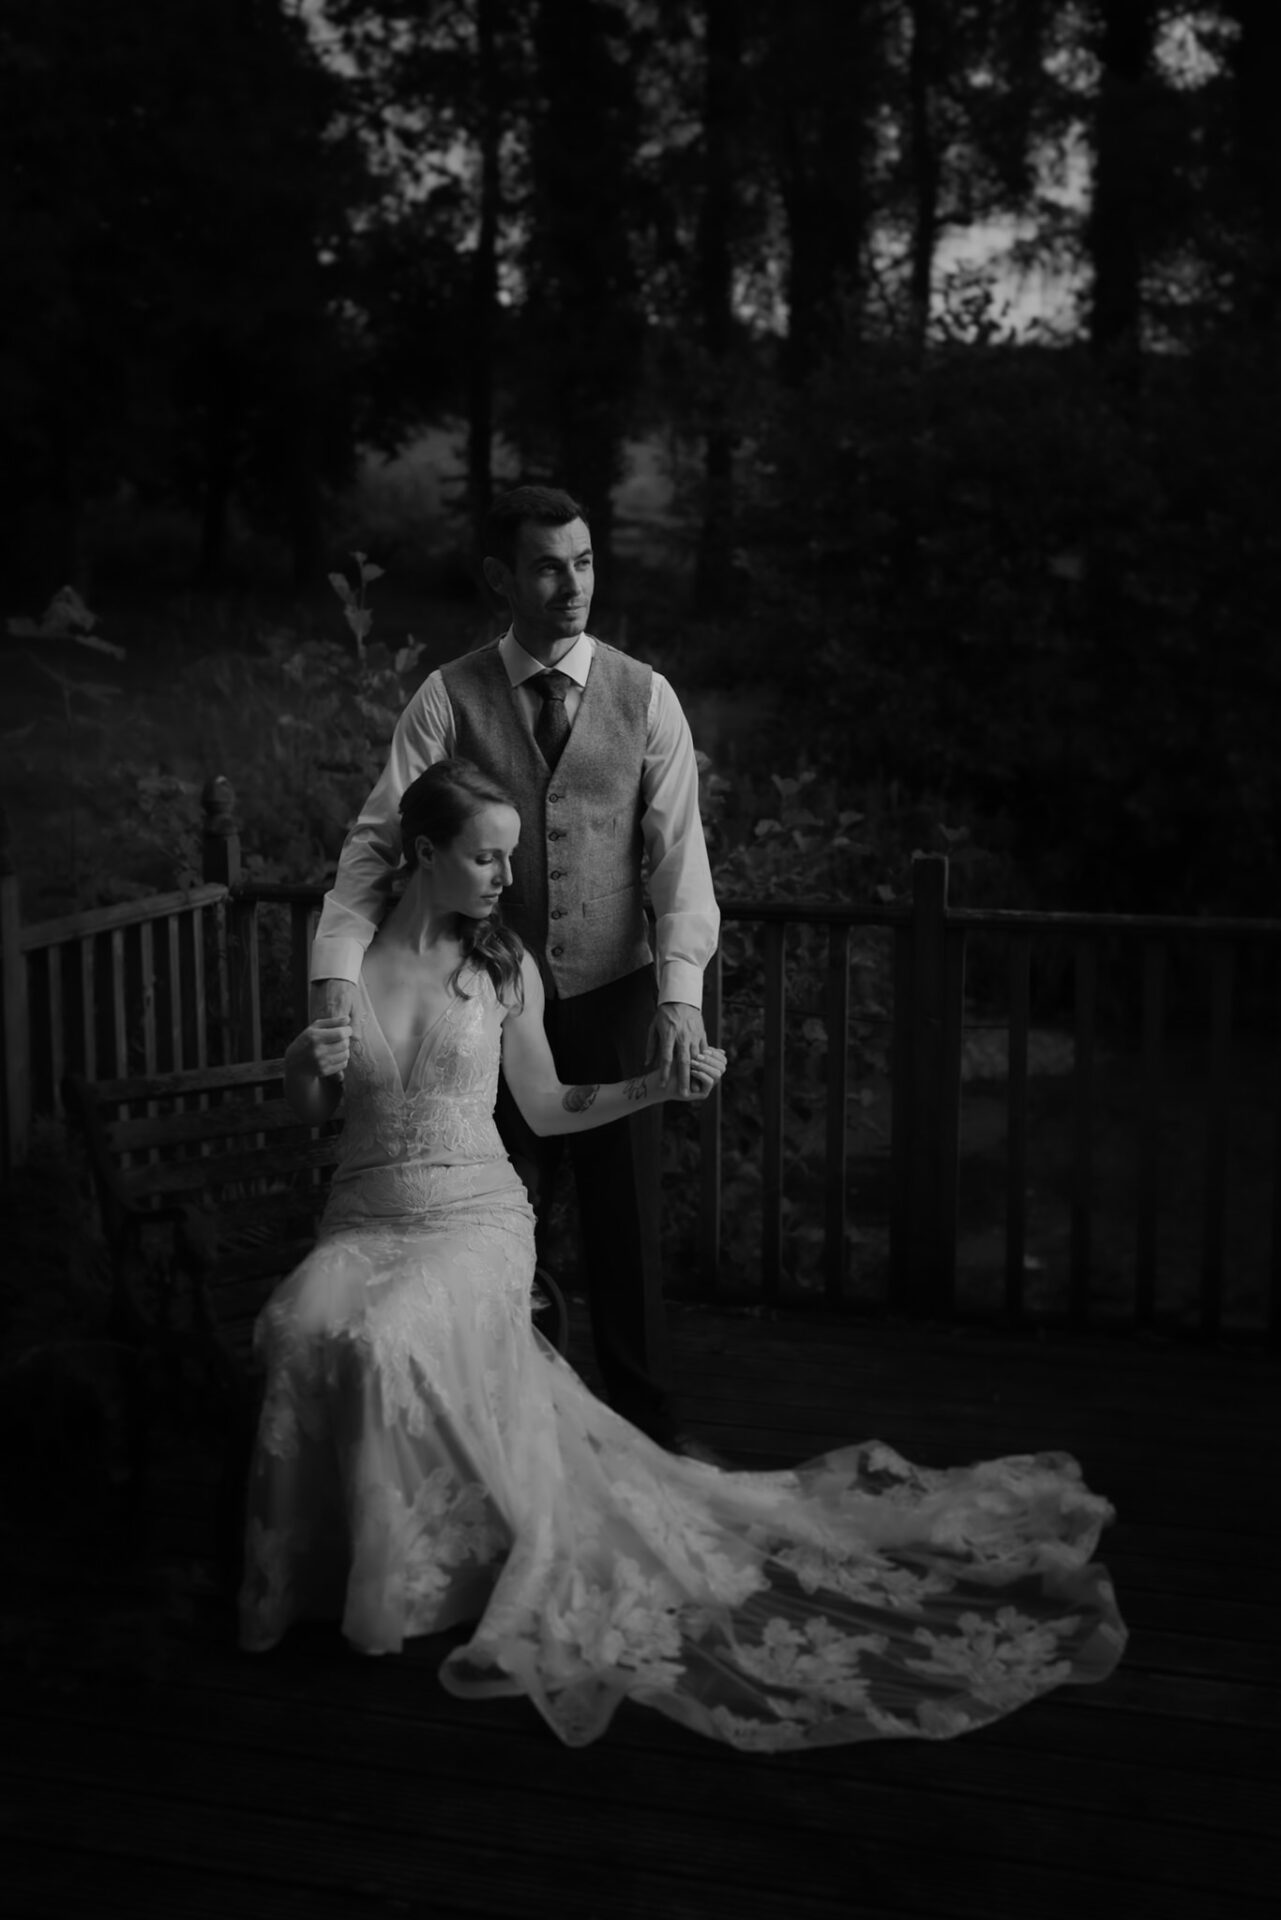 A bride and groom in elegant attire posing on a wooden deck at twilight, surrounded by soft-focused trees from our exclusive wedding photography collection.